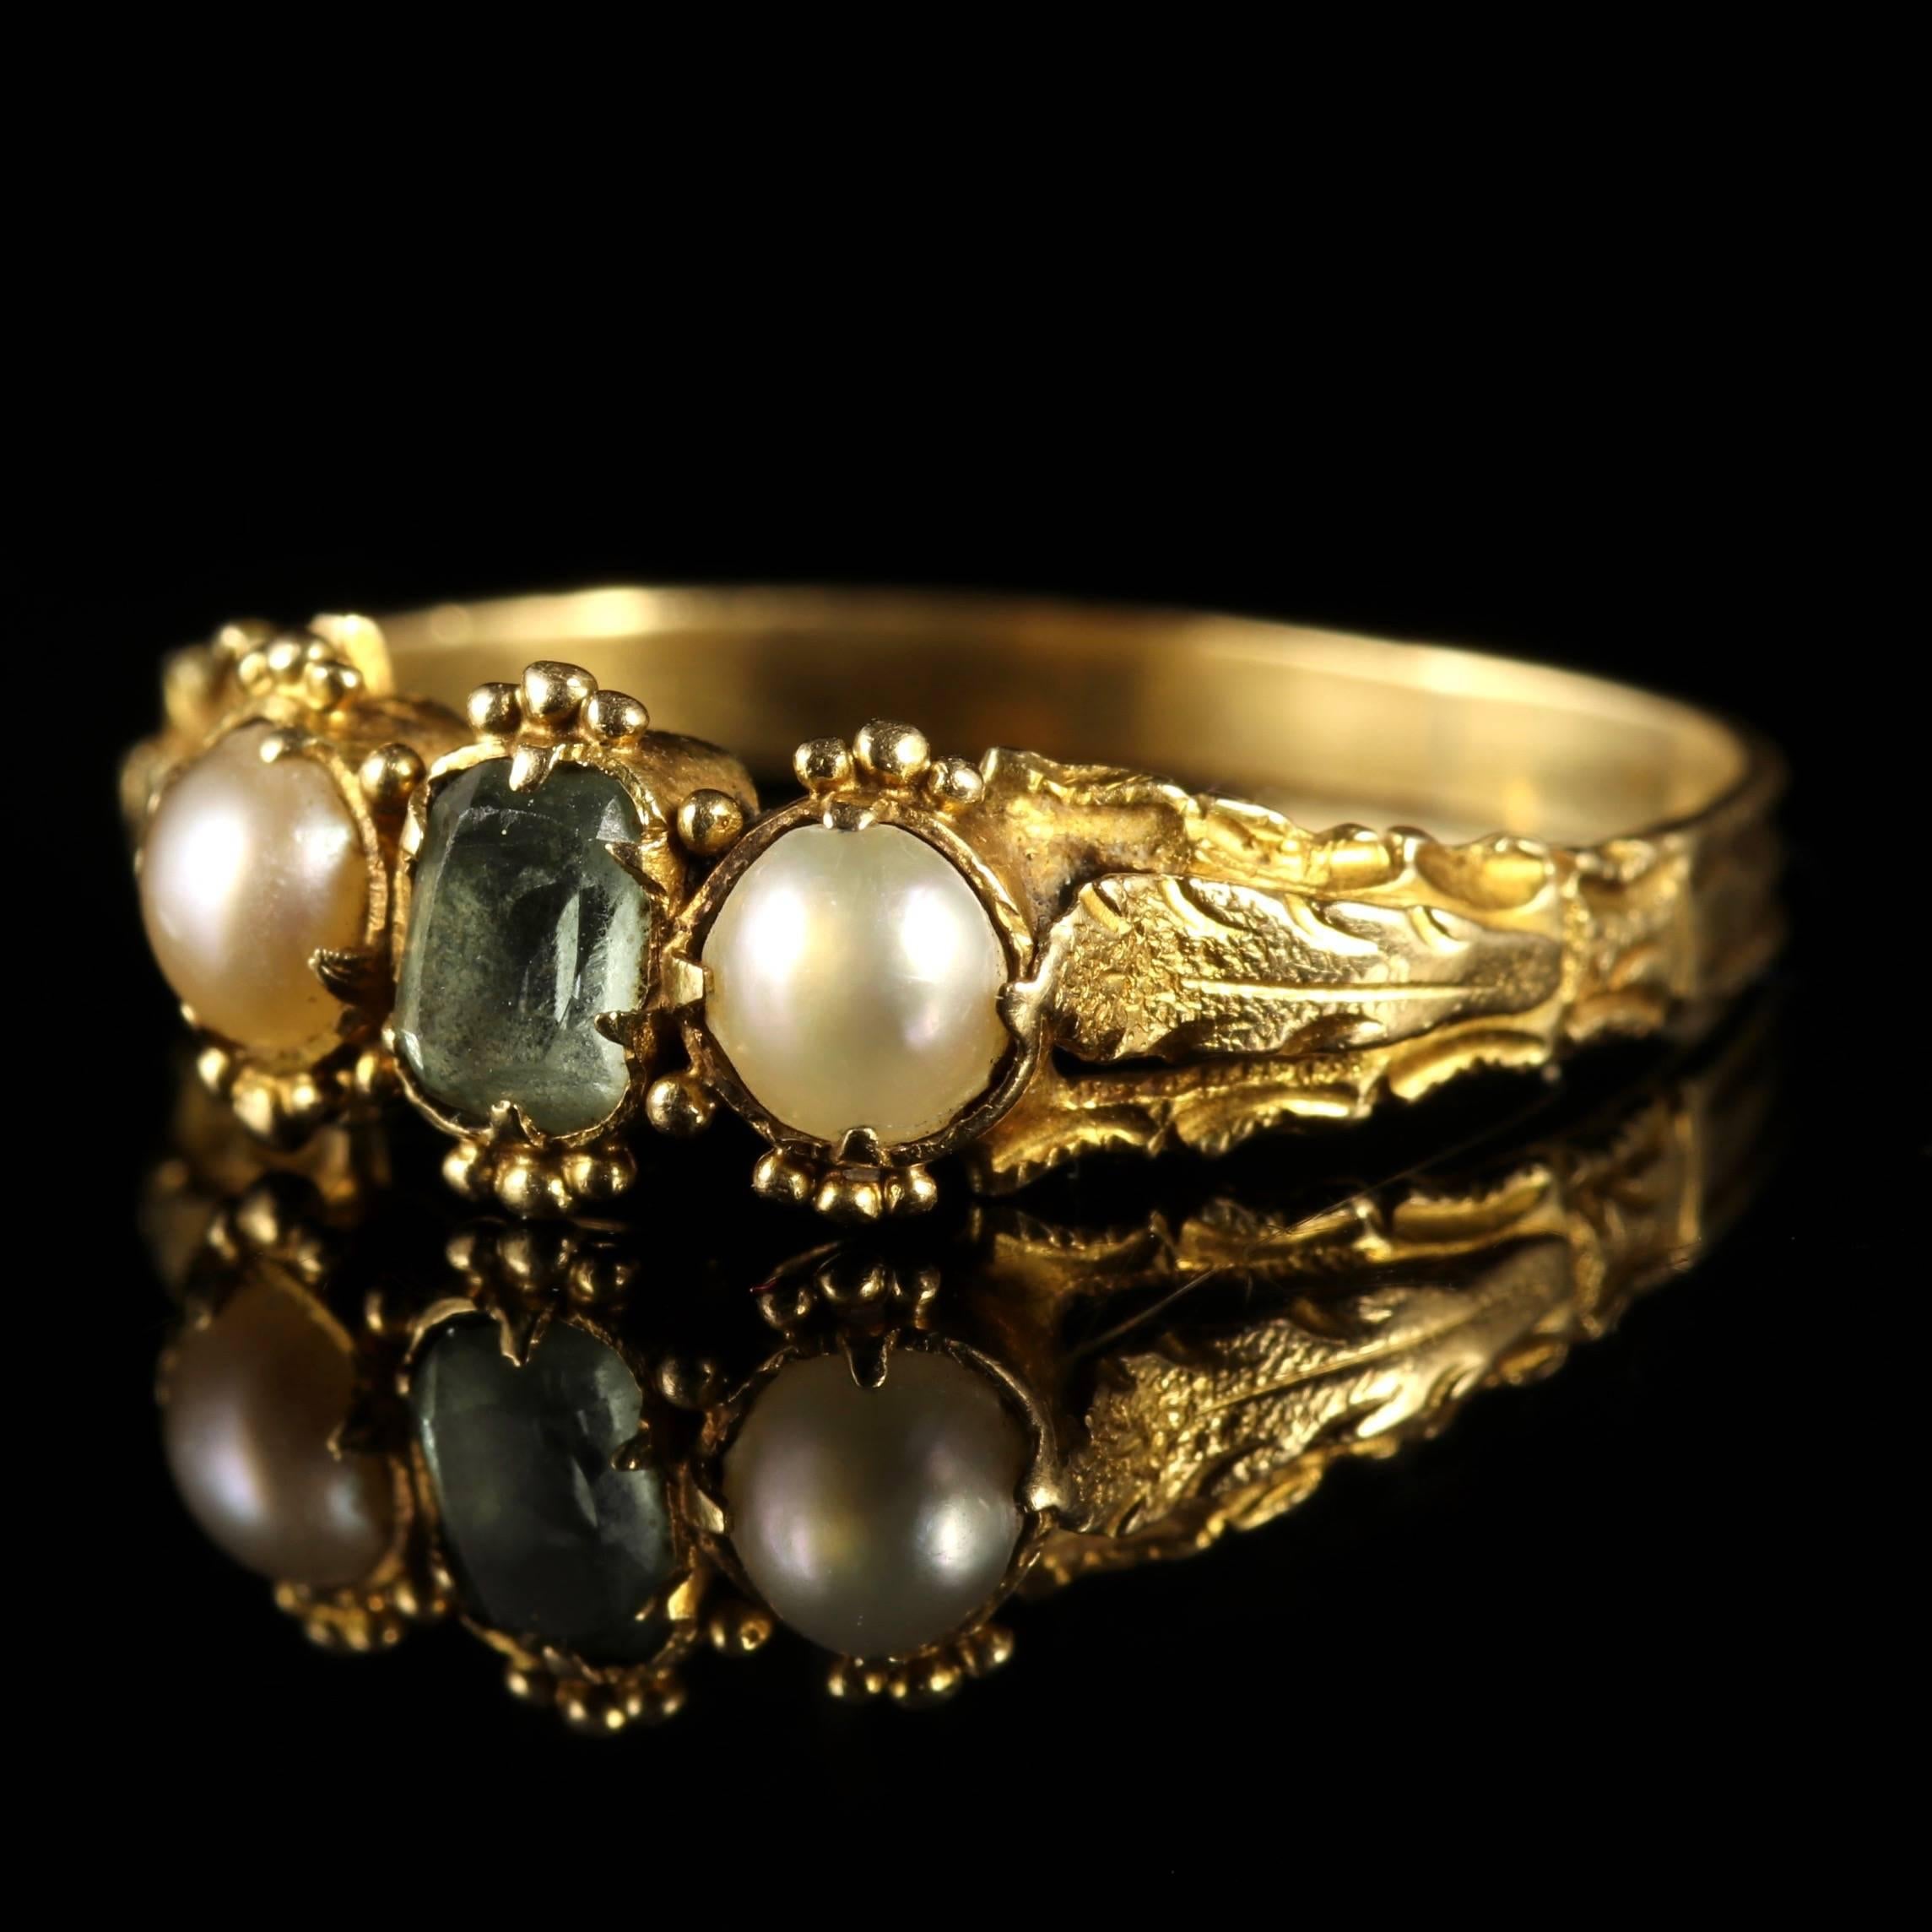 This fabulous 18th century Georgian ring is set with green Tourmaline and Pearls, modelled in 18ct Yellow Gold, Circa 1780.

A trilogy of beautiful gemstones that compliment each other superbly.

Due to its age, Georgian jewellery is quite rare,